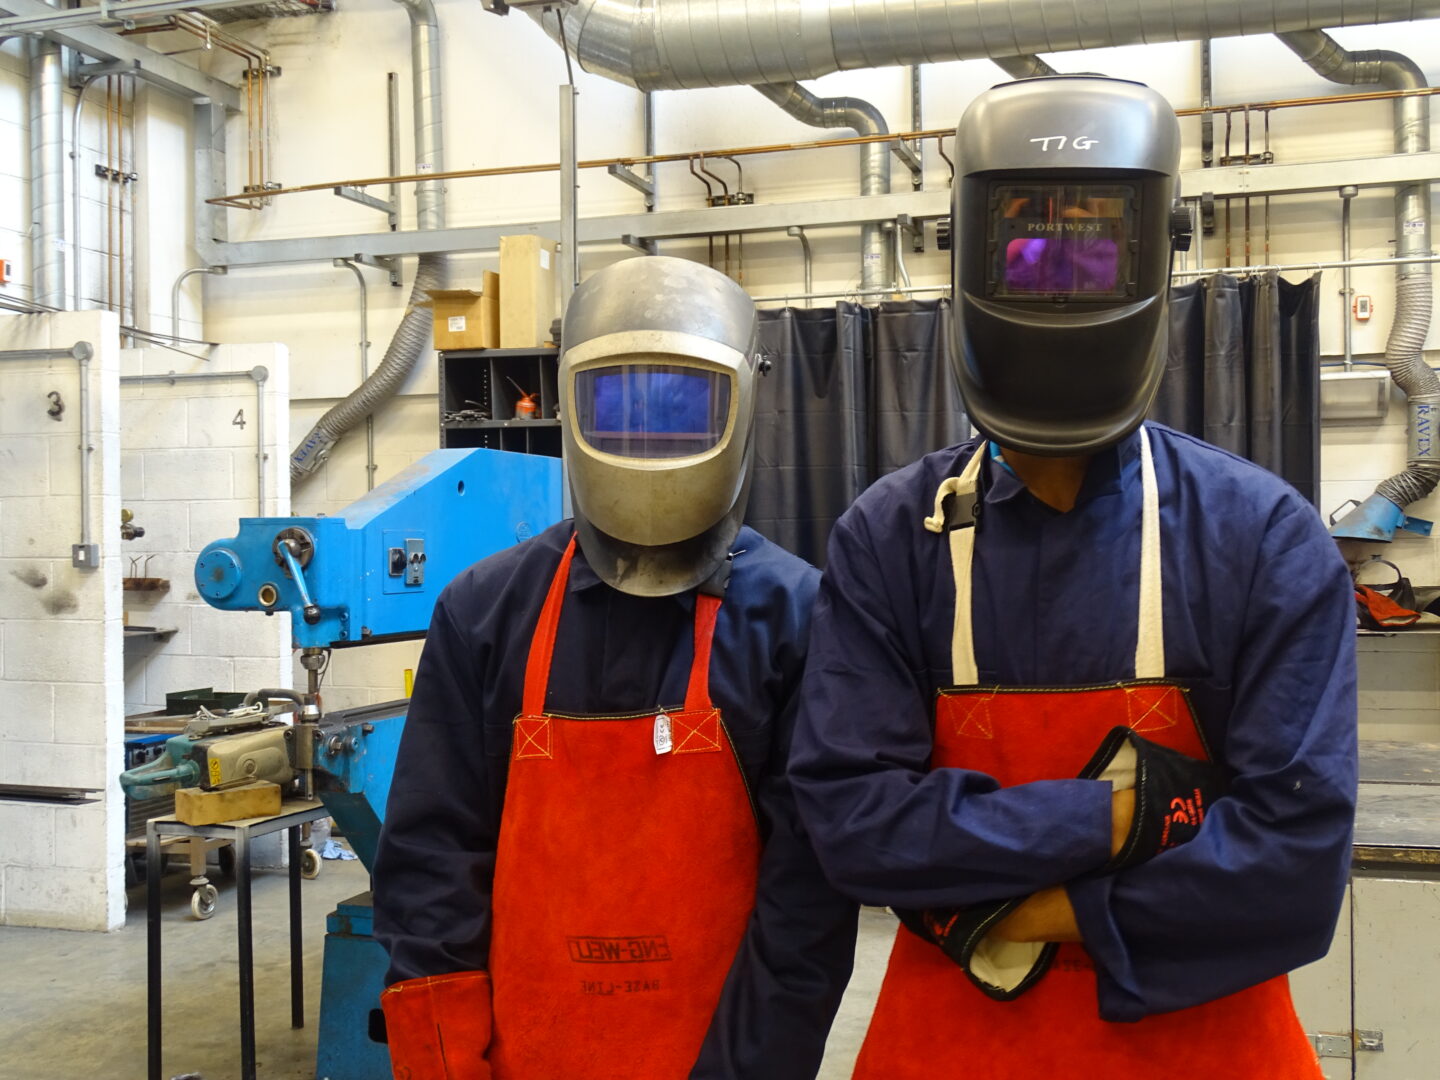 welding students stood in a welding workshop wearing safety equipment